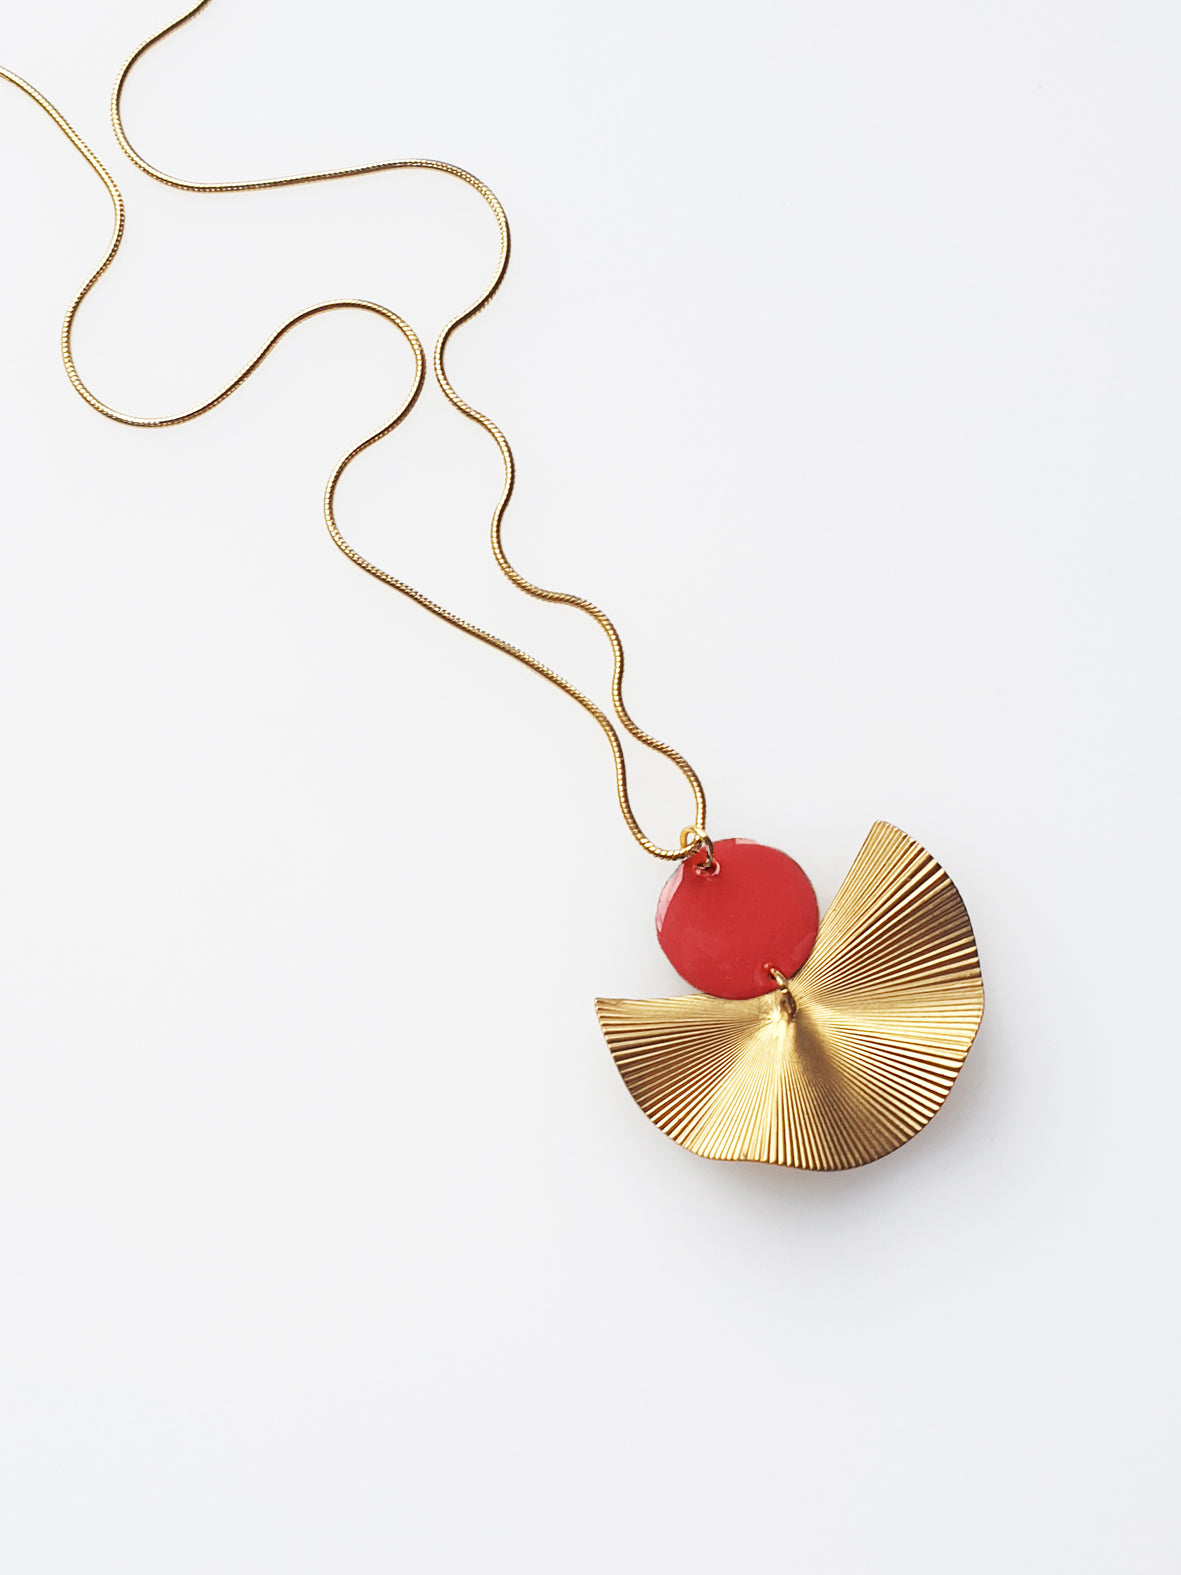 A necklace sits against a white background. It features a gold chain, a coral enamel connector dot and a textured brass fan piece.